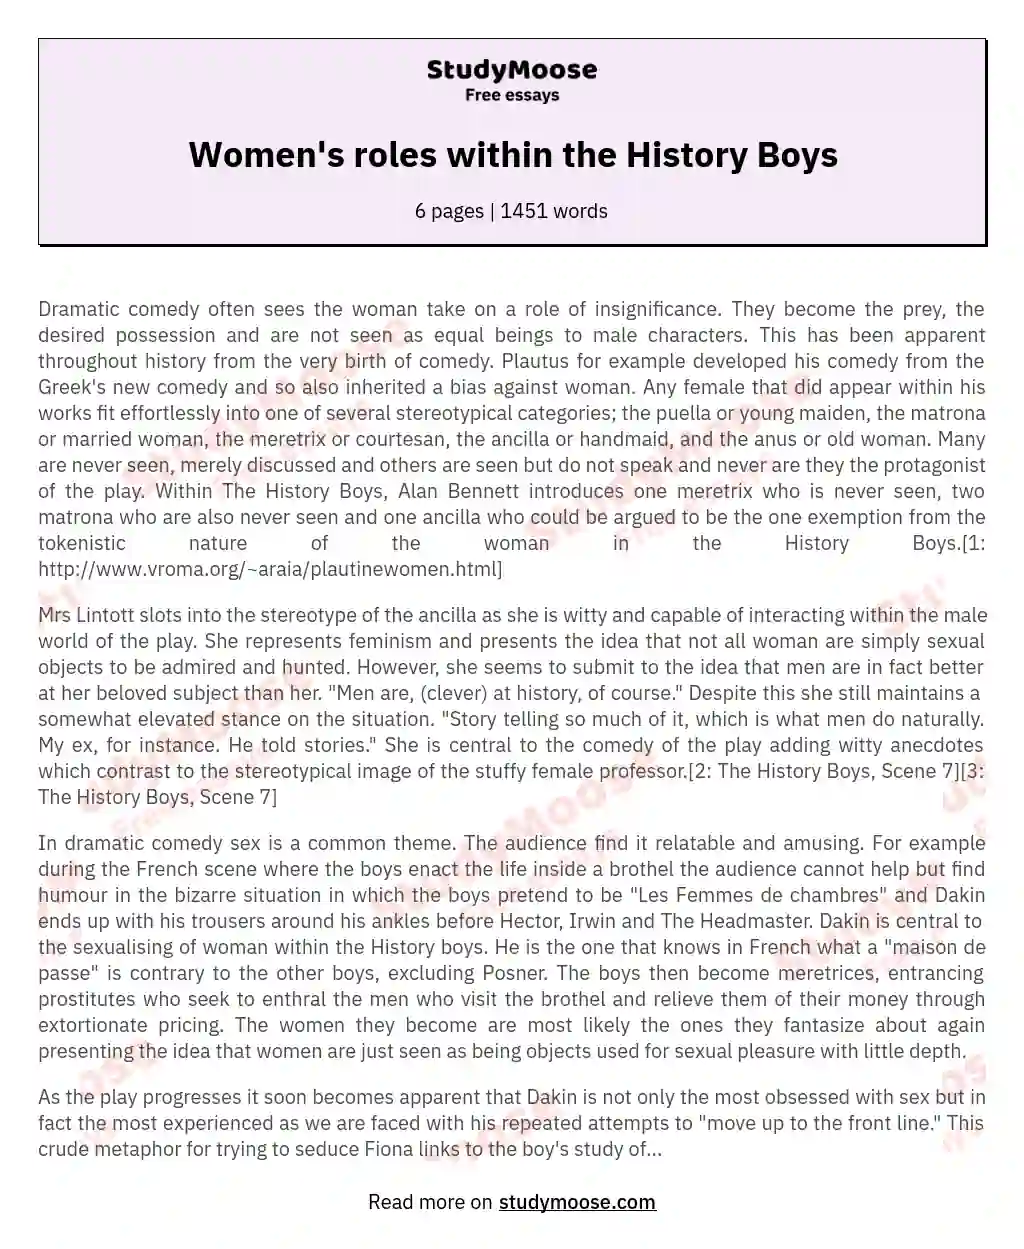 Women's roles within the History Boys